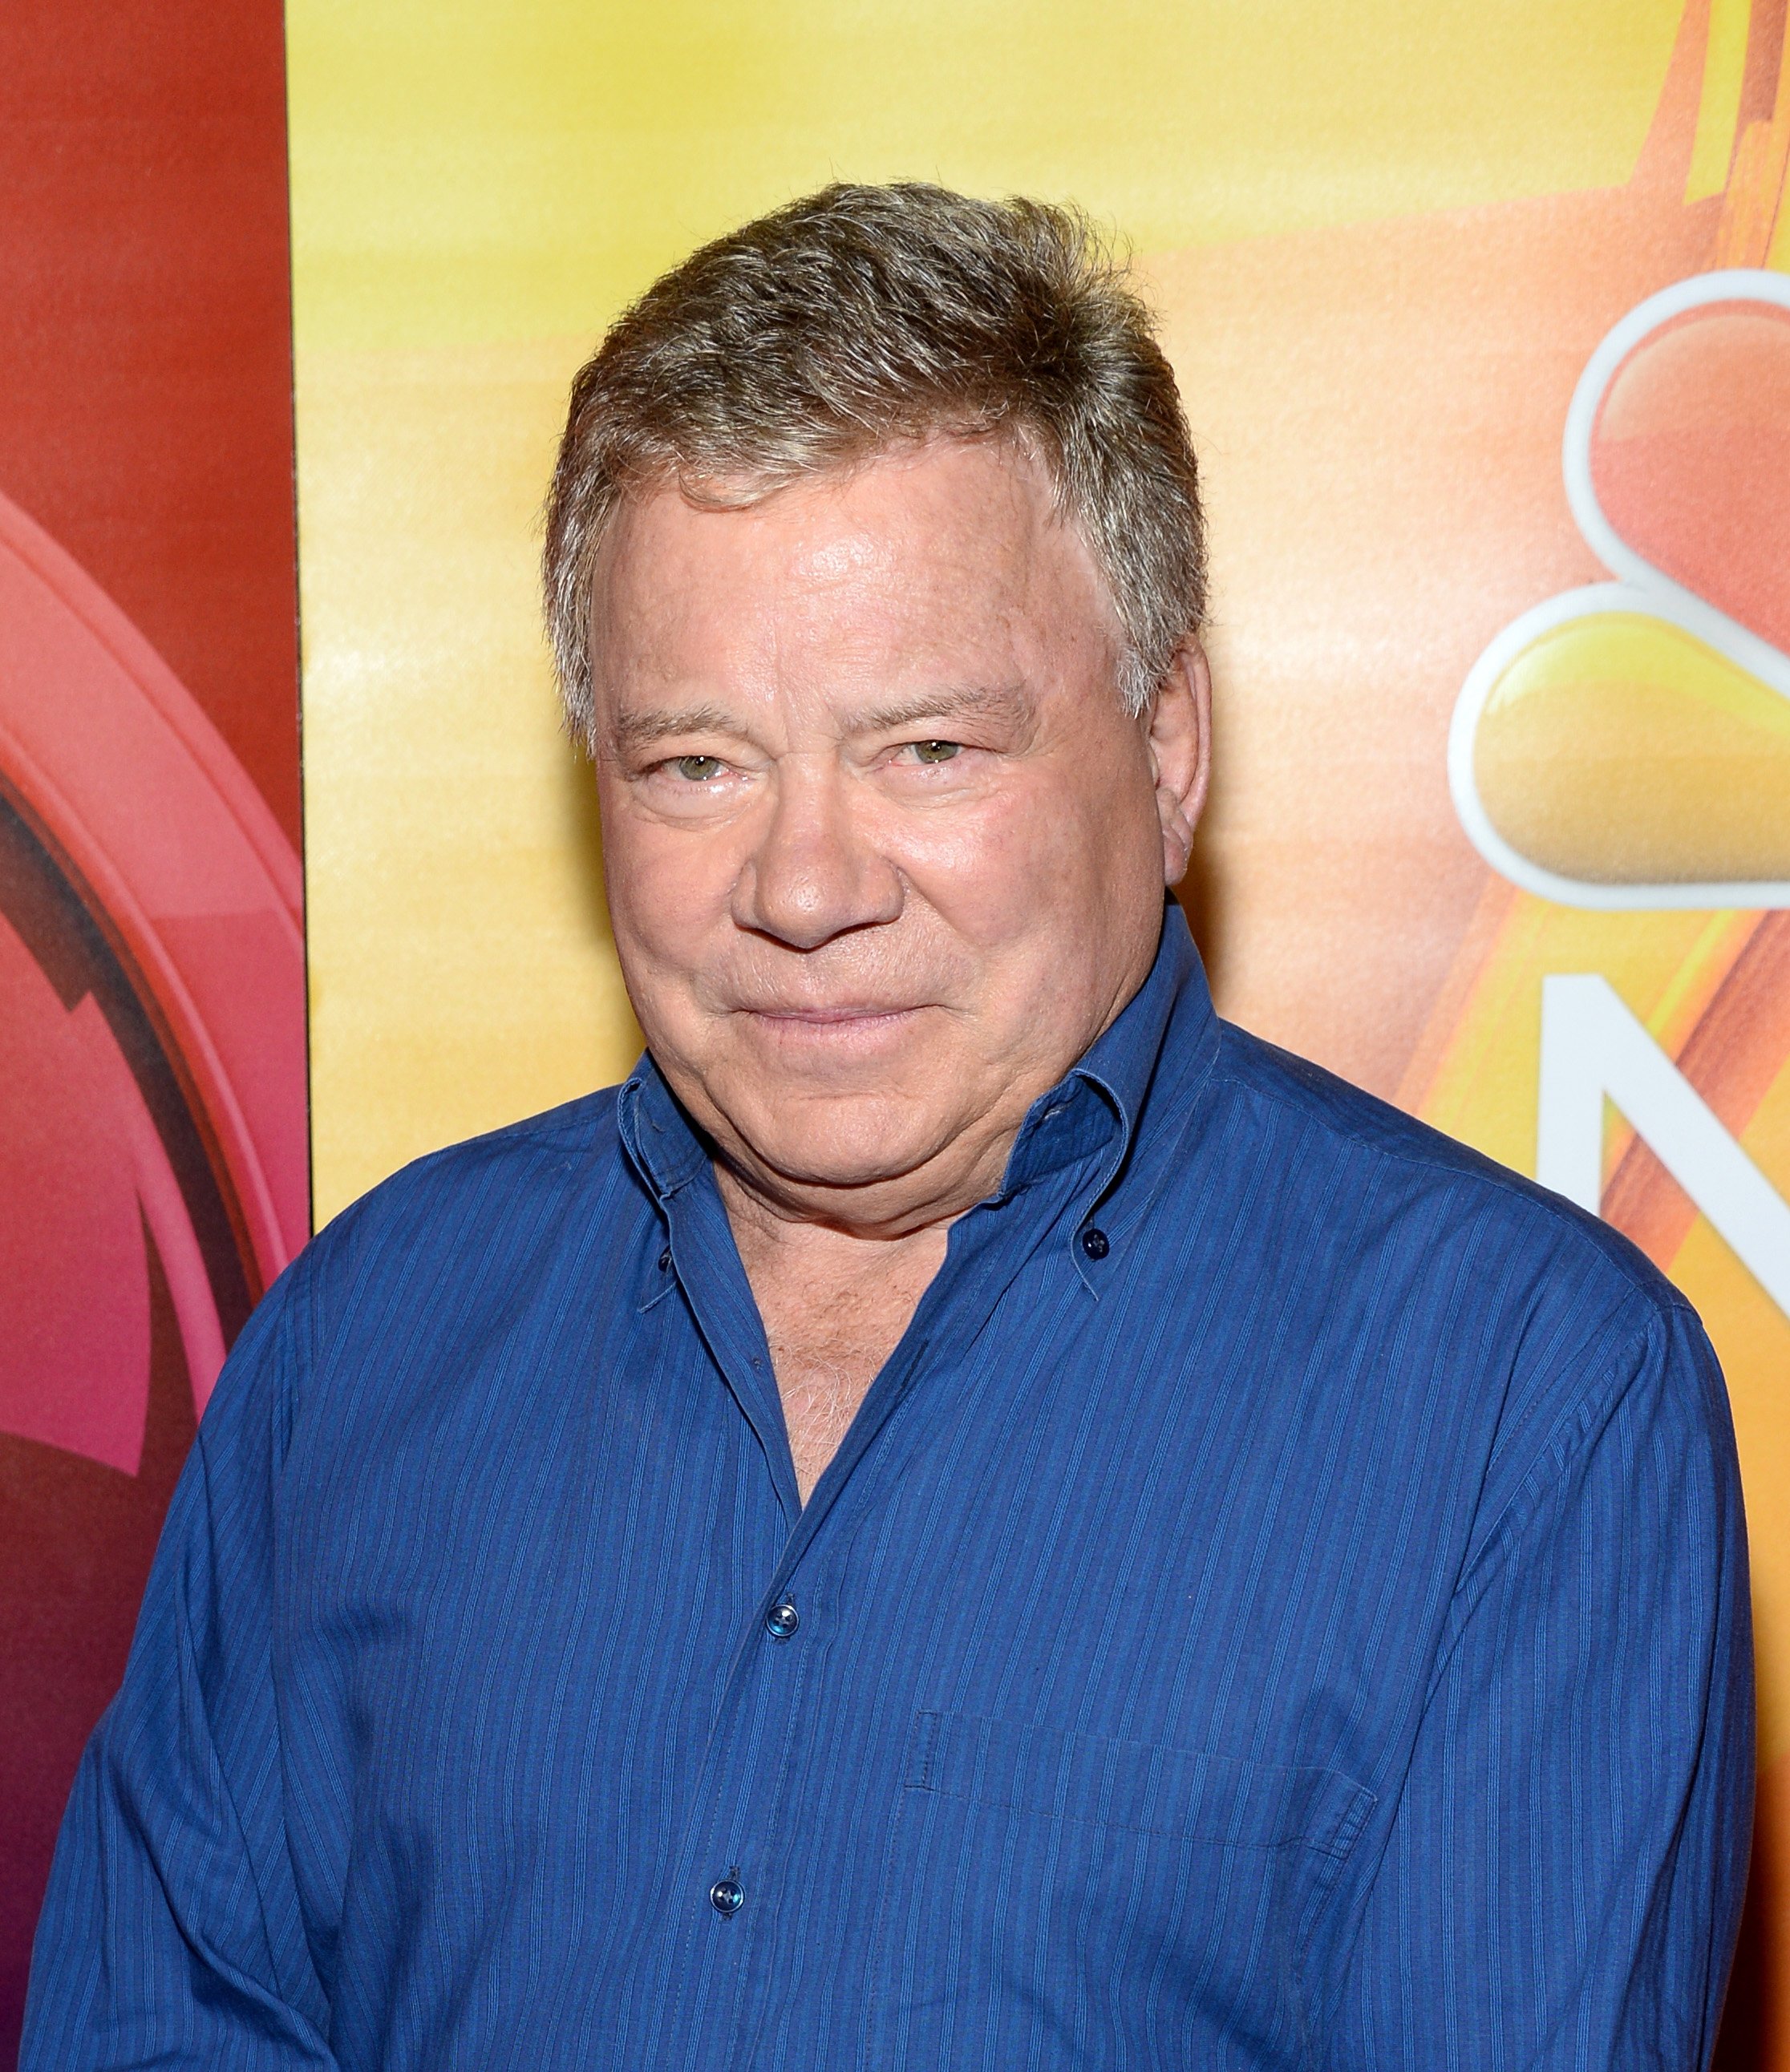 William Shatner attends the NBCUniversal press day during the 2016 Summer TCA Tour at The Beverly Hilton Hotel on August 2, 2016, in Beverly Hills, California. | Source: Getty Images.